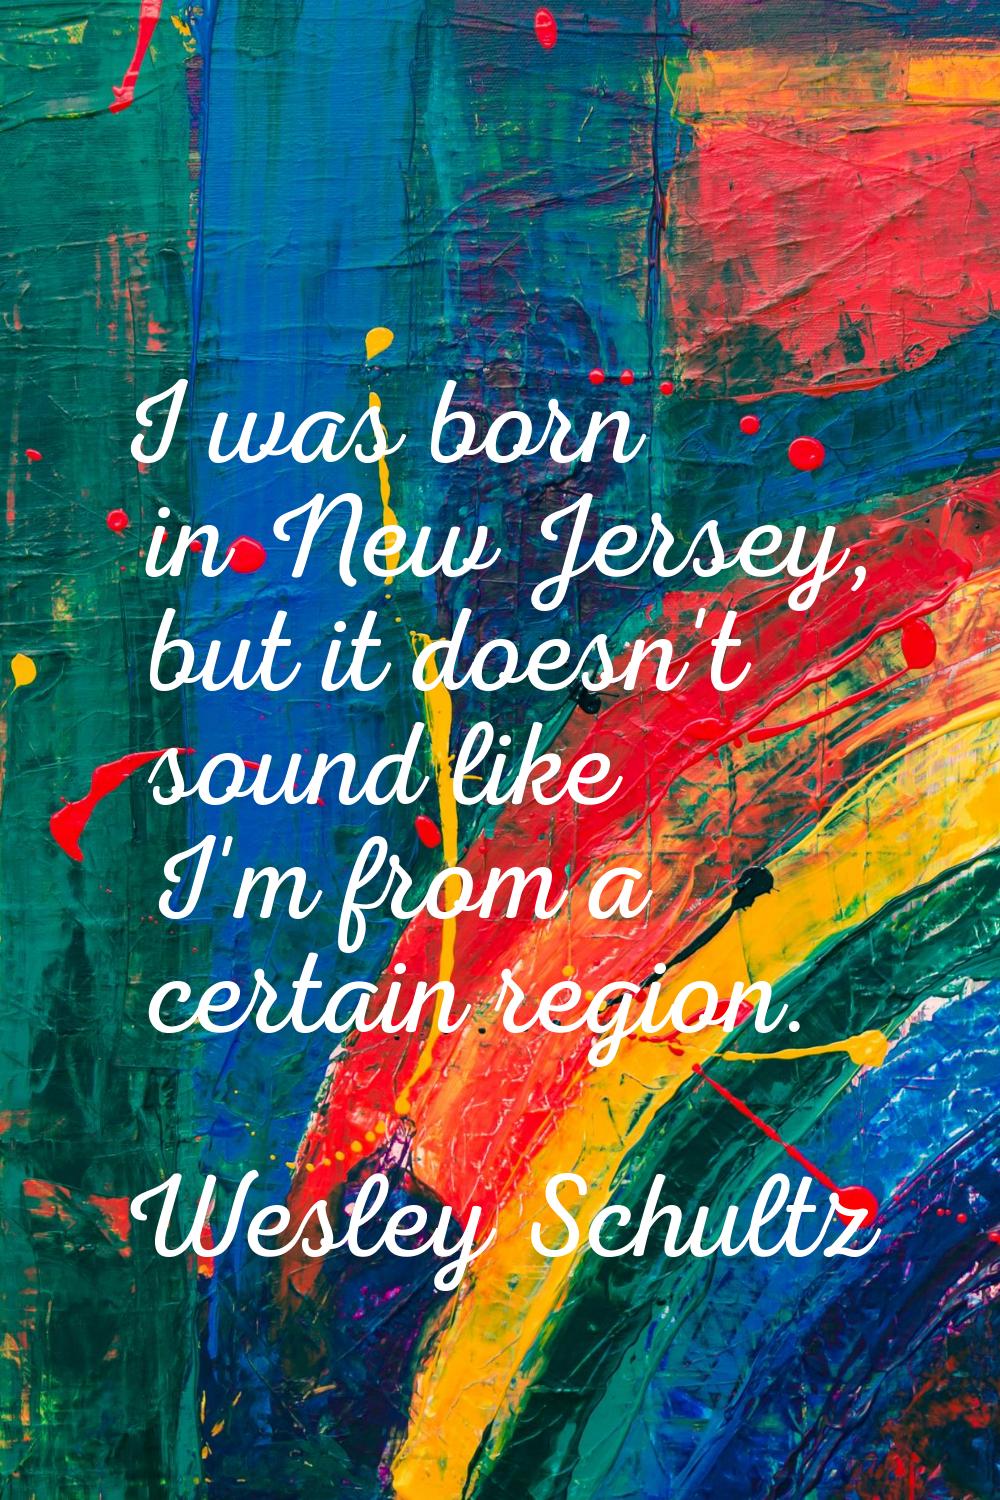 I was born in New Jersey, but it doesn't sound like I'm from a certain region.